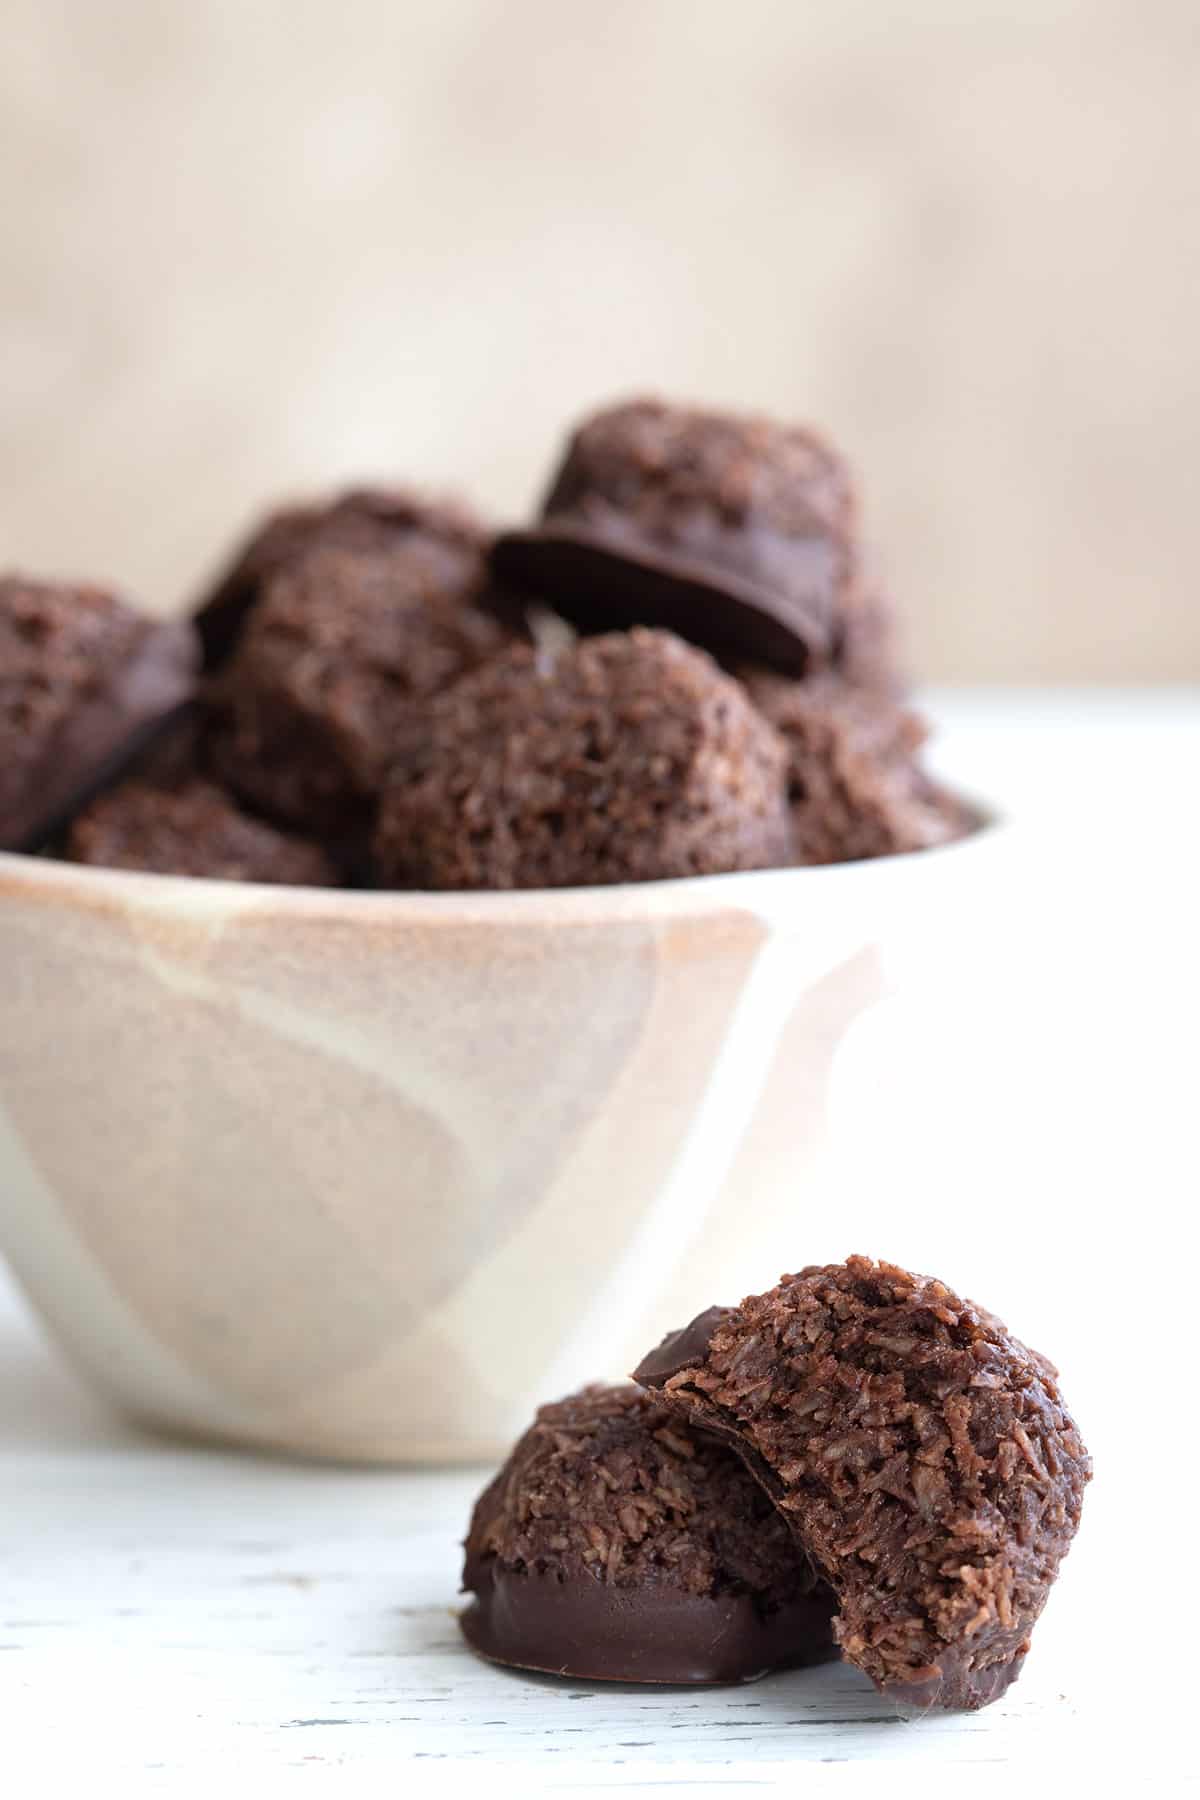 Two keto chocolate macaroons sitting in front of a bowl of more macaroons.